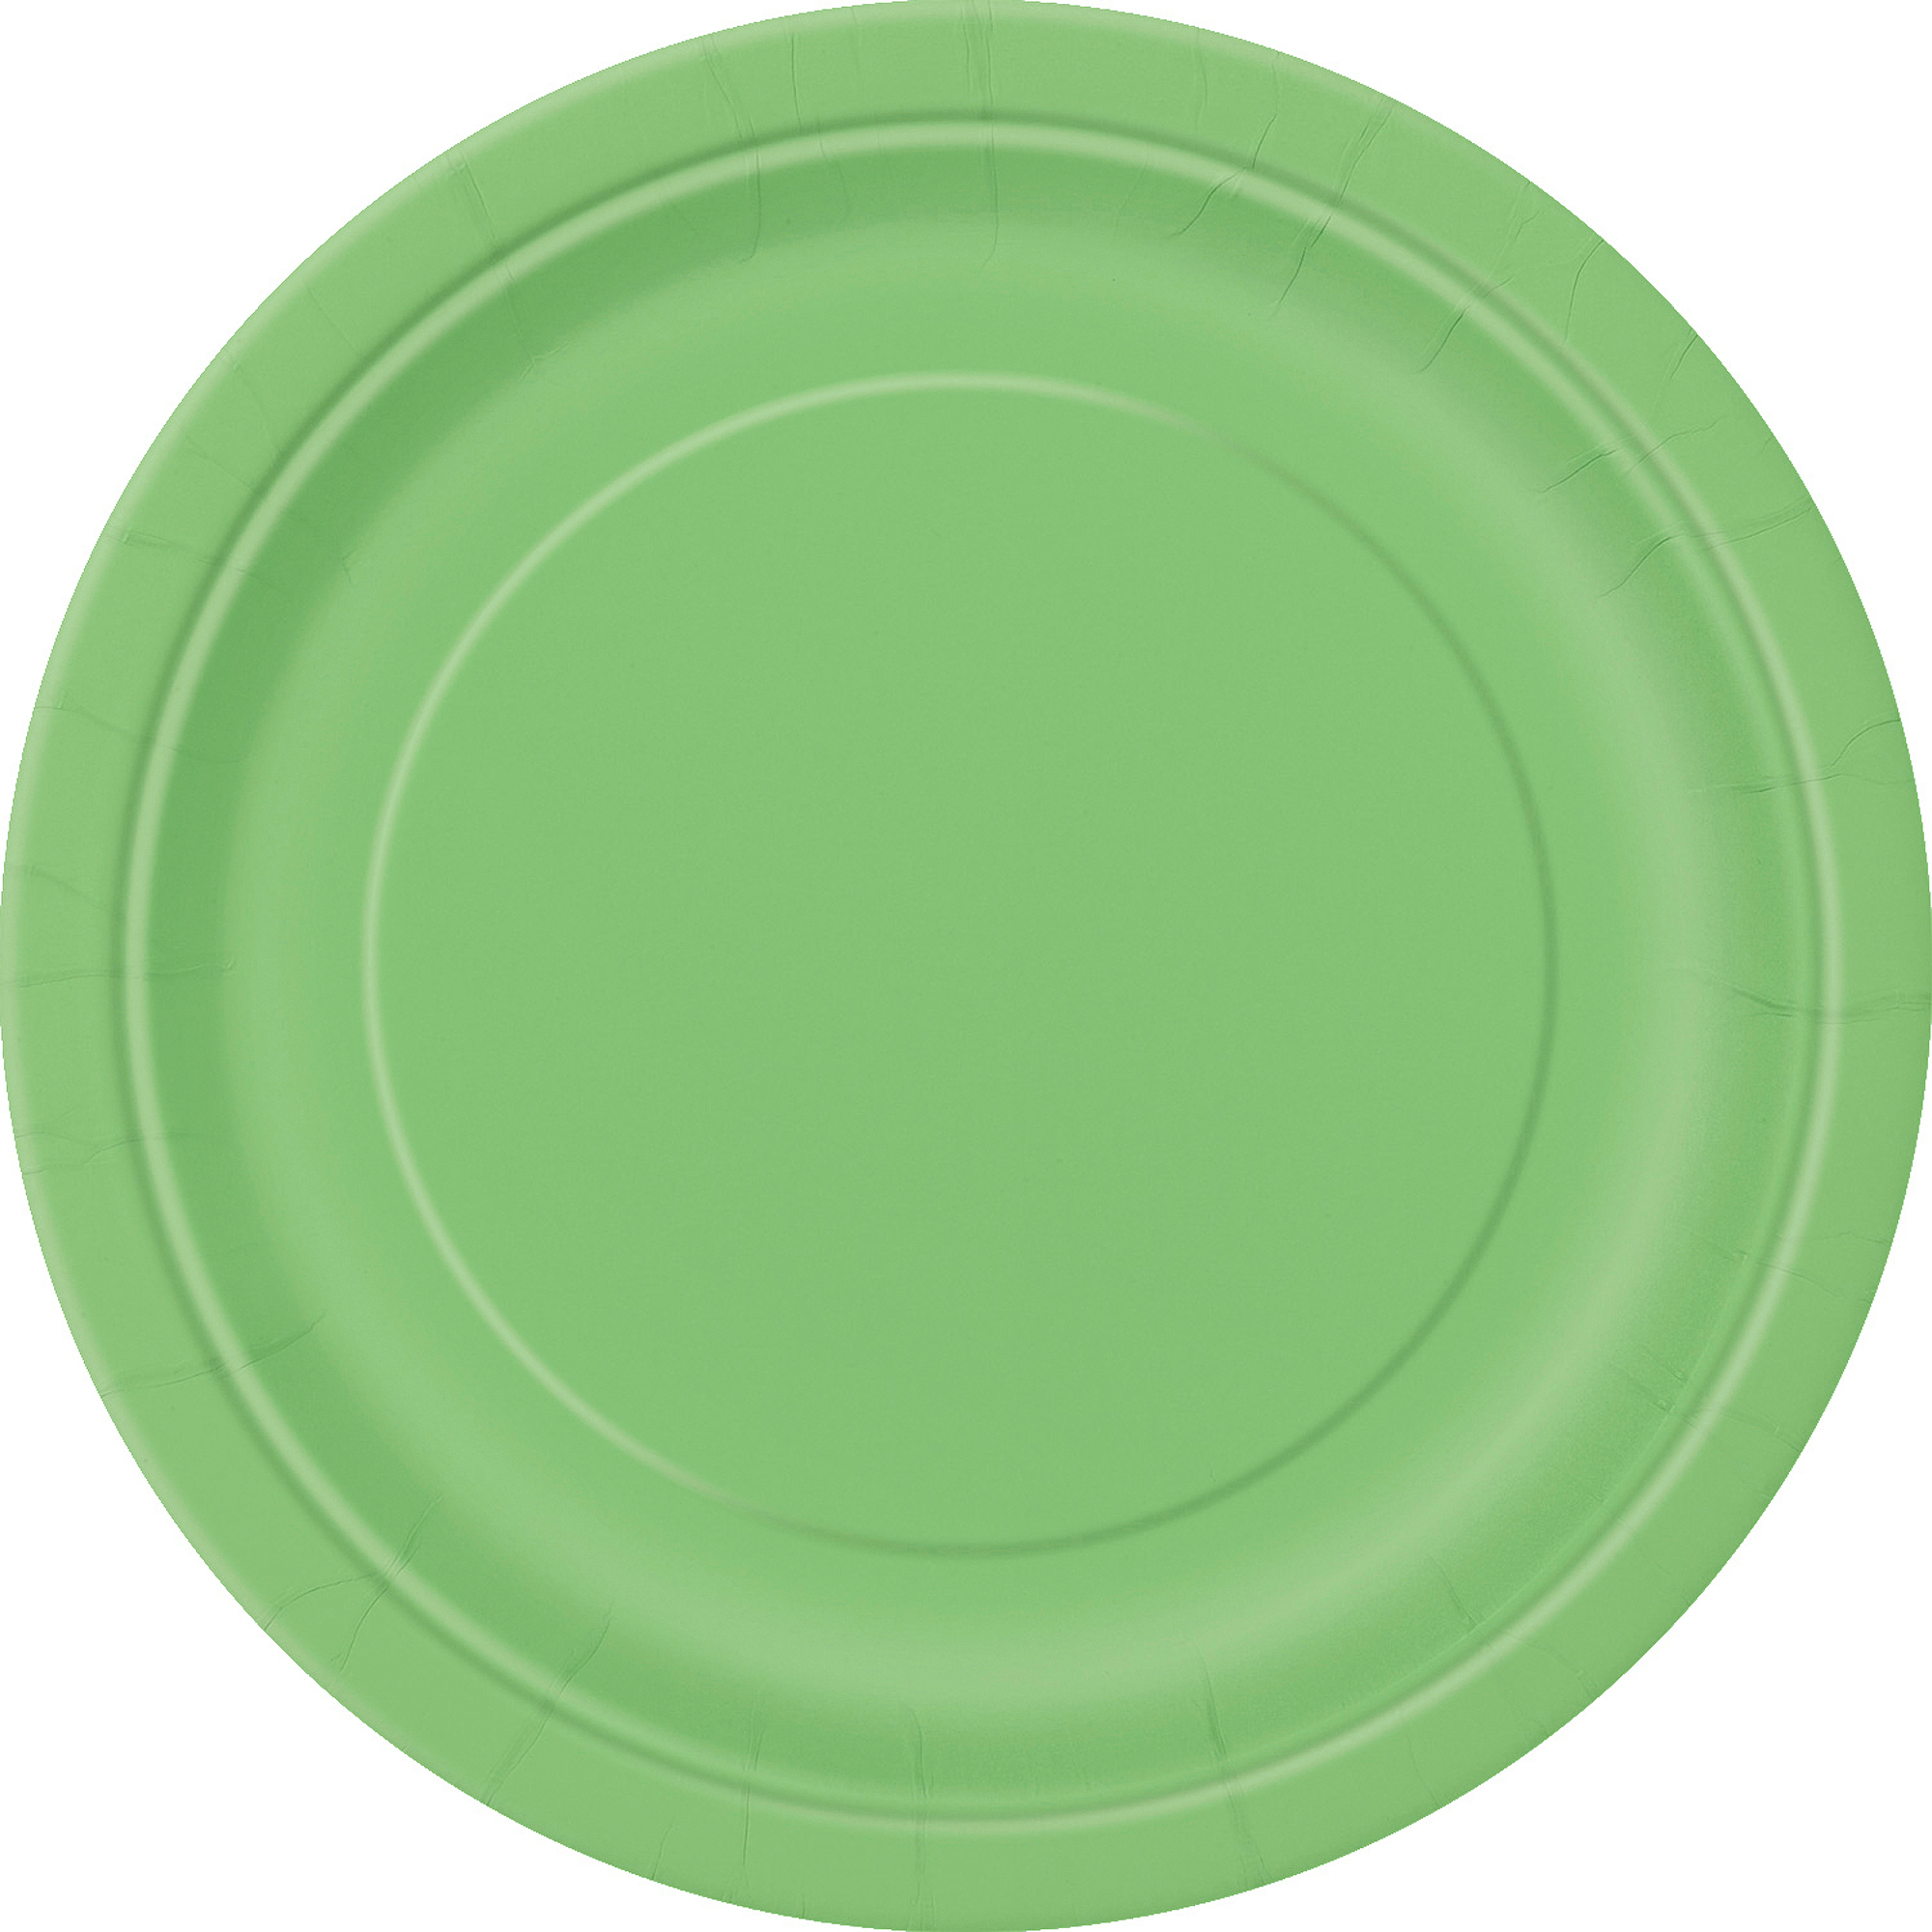 9" Neon Green Party Plates, 55 Count - image 2 of 2